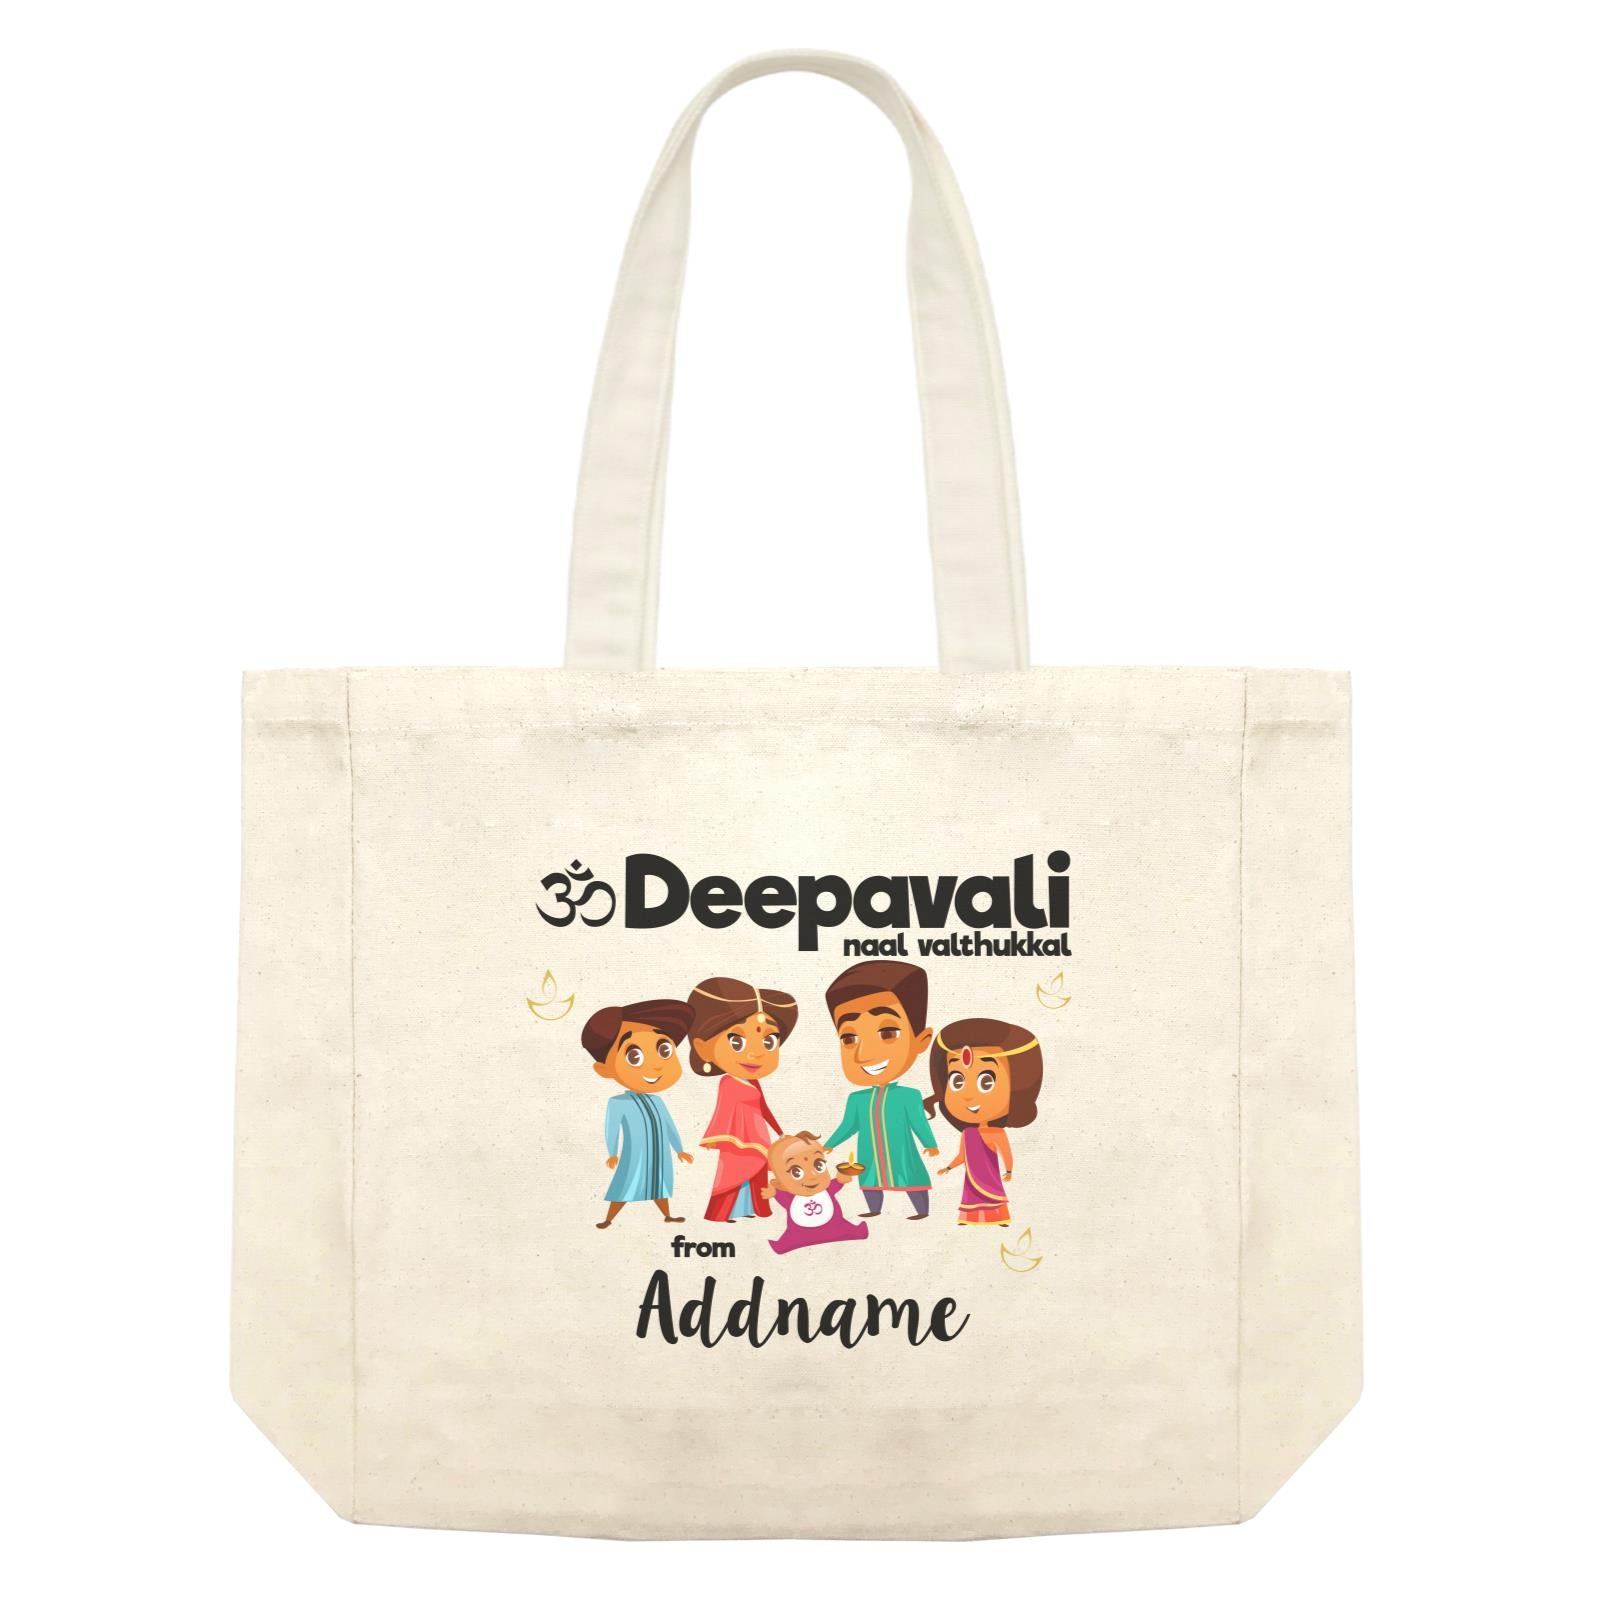 Cute Family Of Five OM Deepavali From Addname Shopping Bag